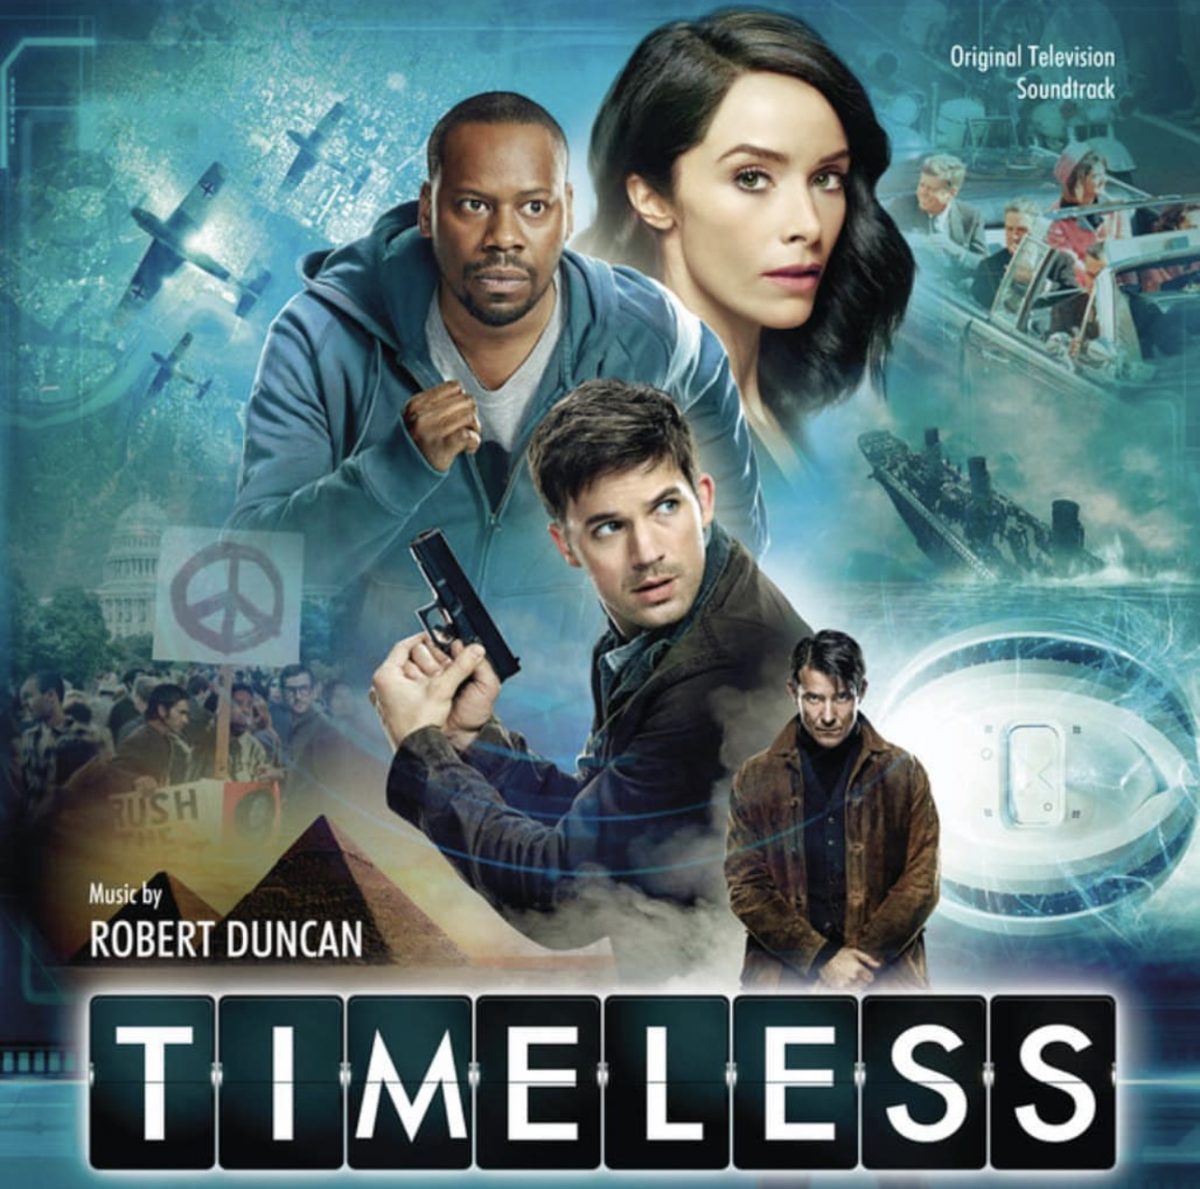 Timeless+is+a+quick%2C+two-season+watch%2C+guaranteed+to+please.+%28Courtesy+of+Instagram%29